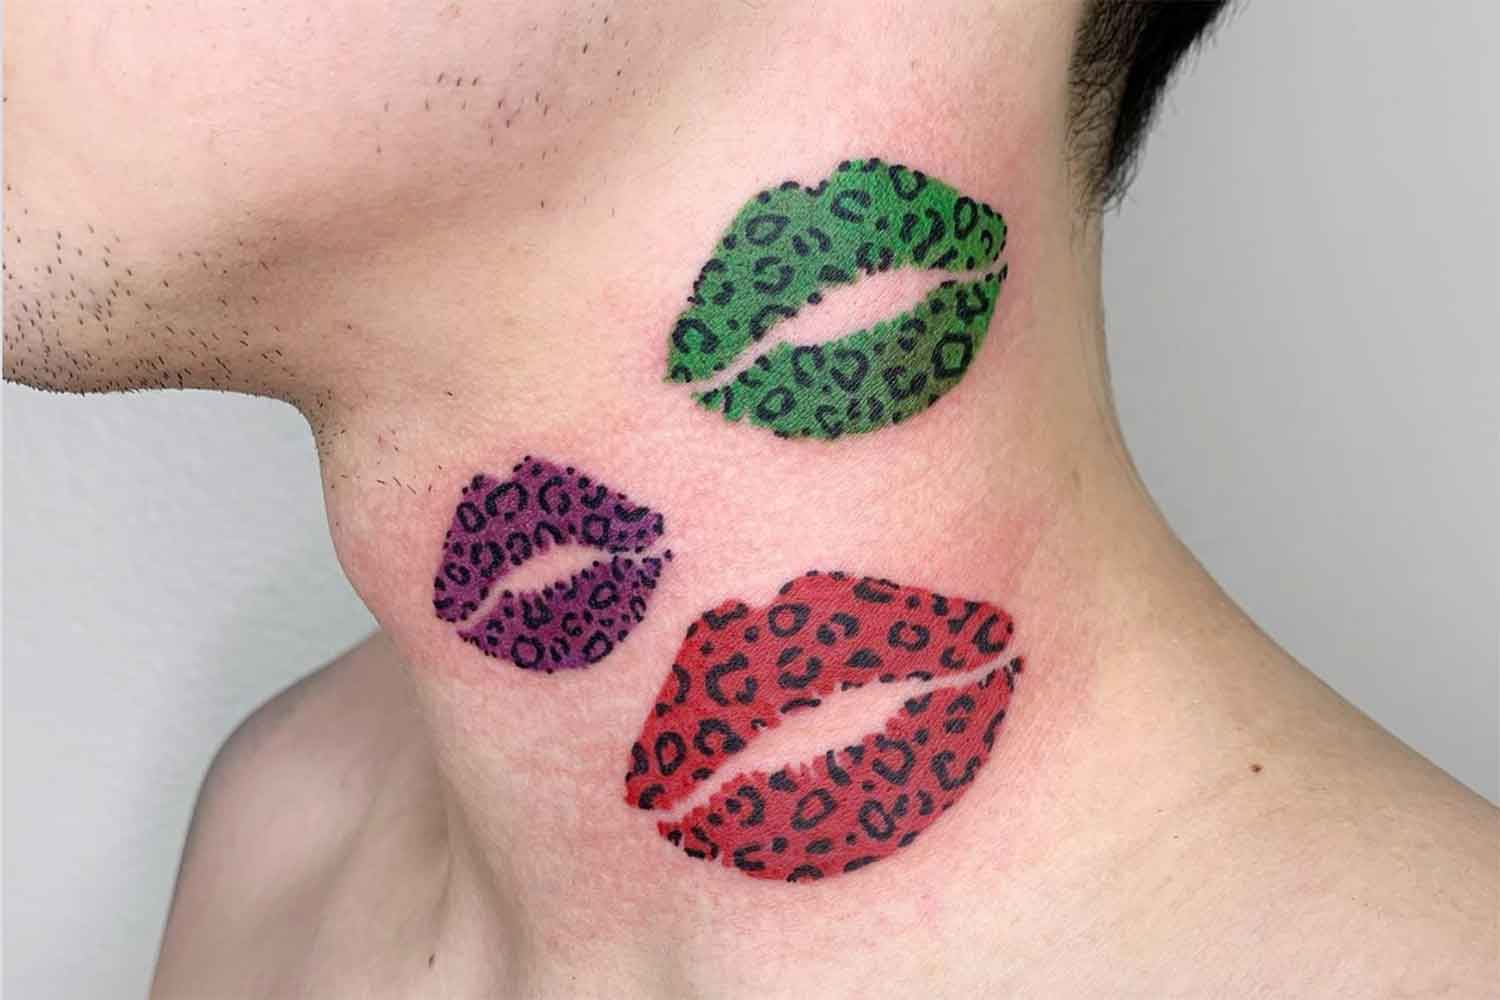 Share more than 65 lips on neck tattoo super hot  thtantai2